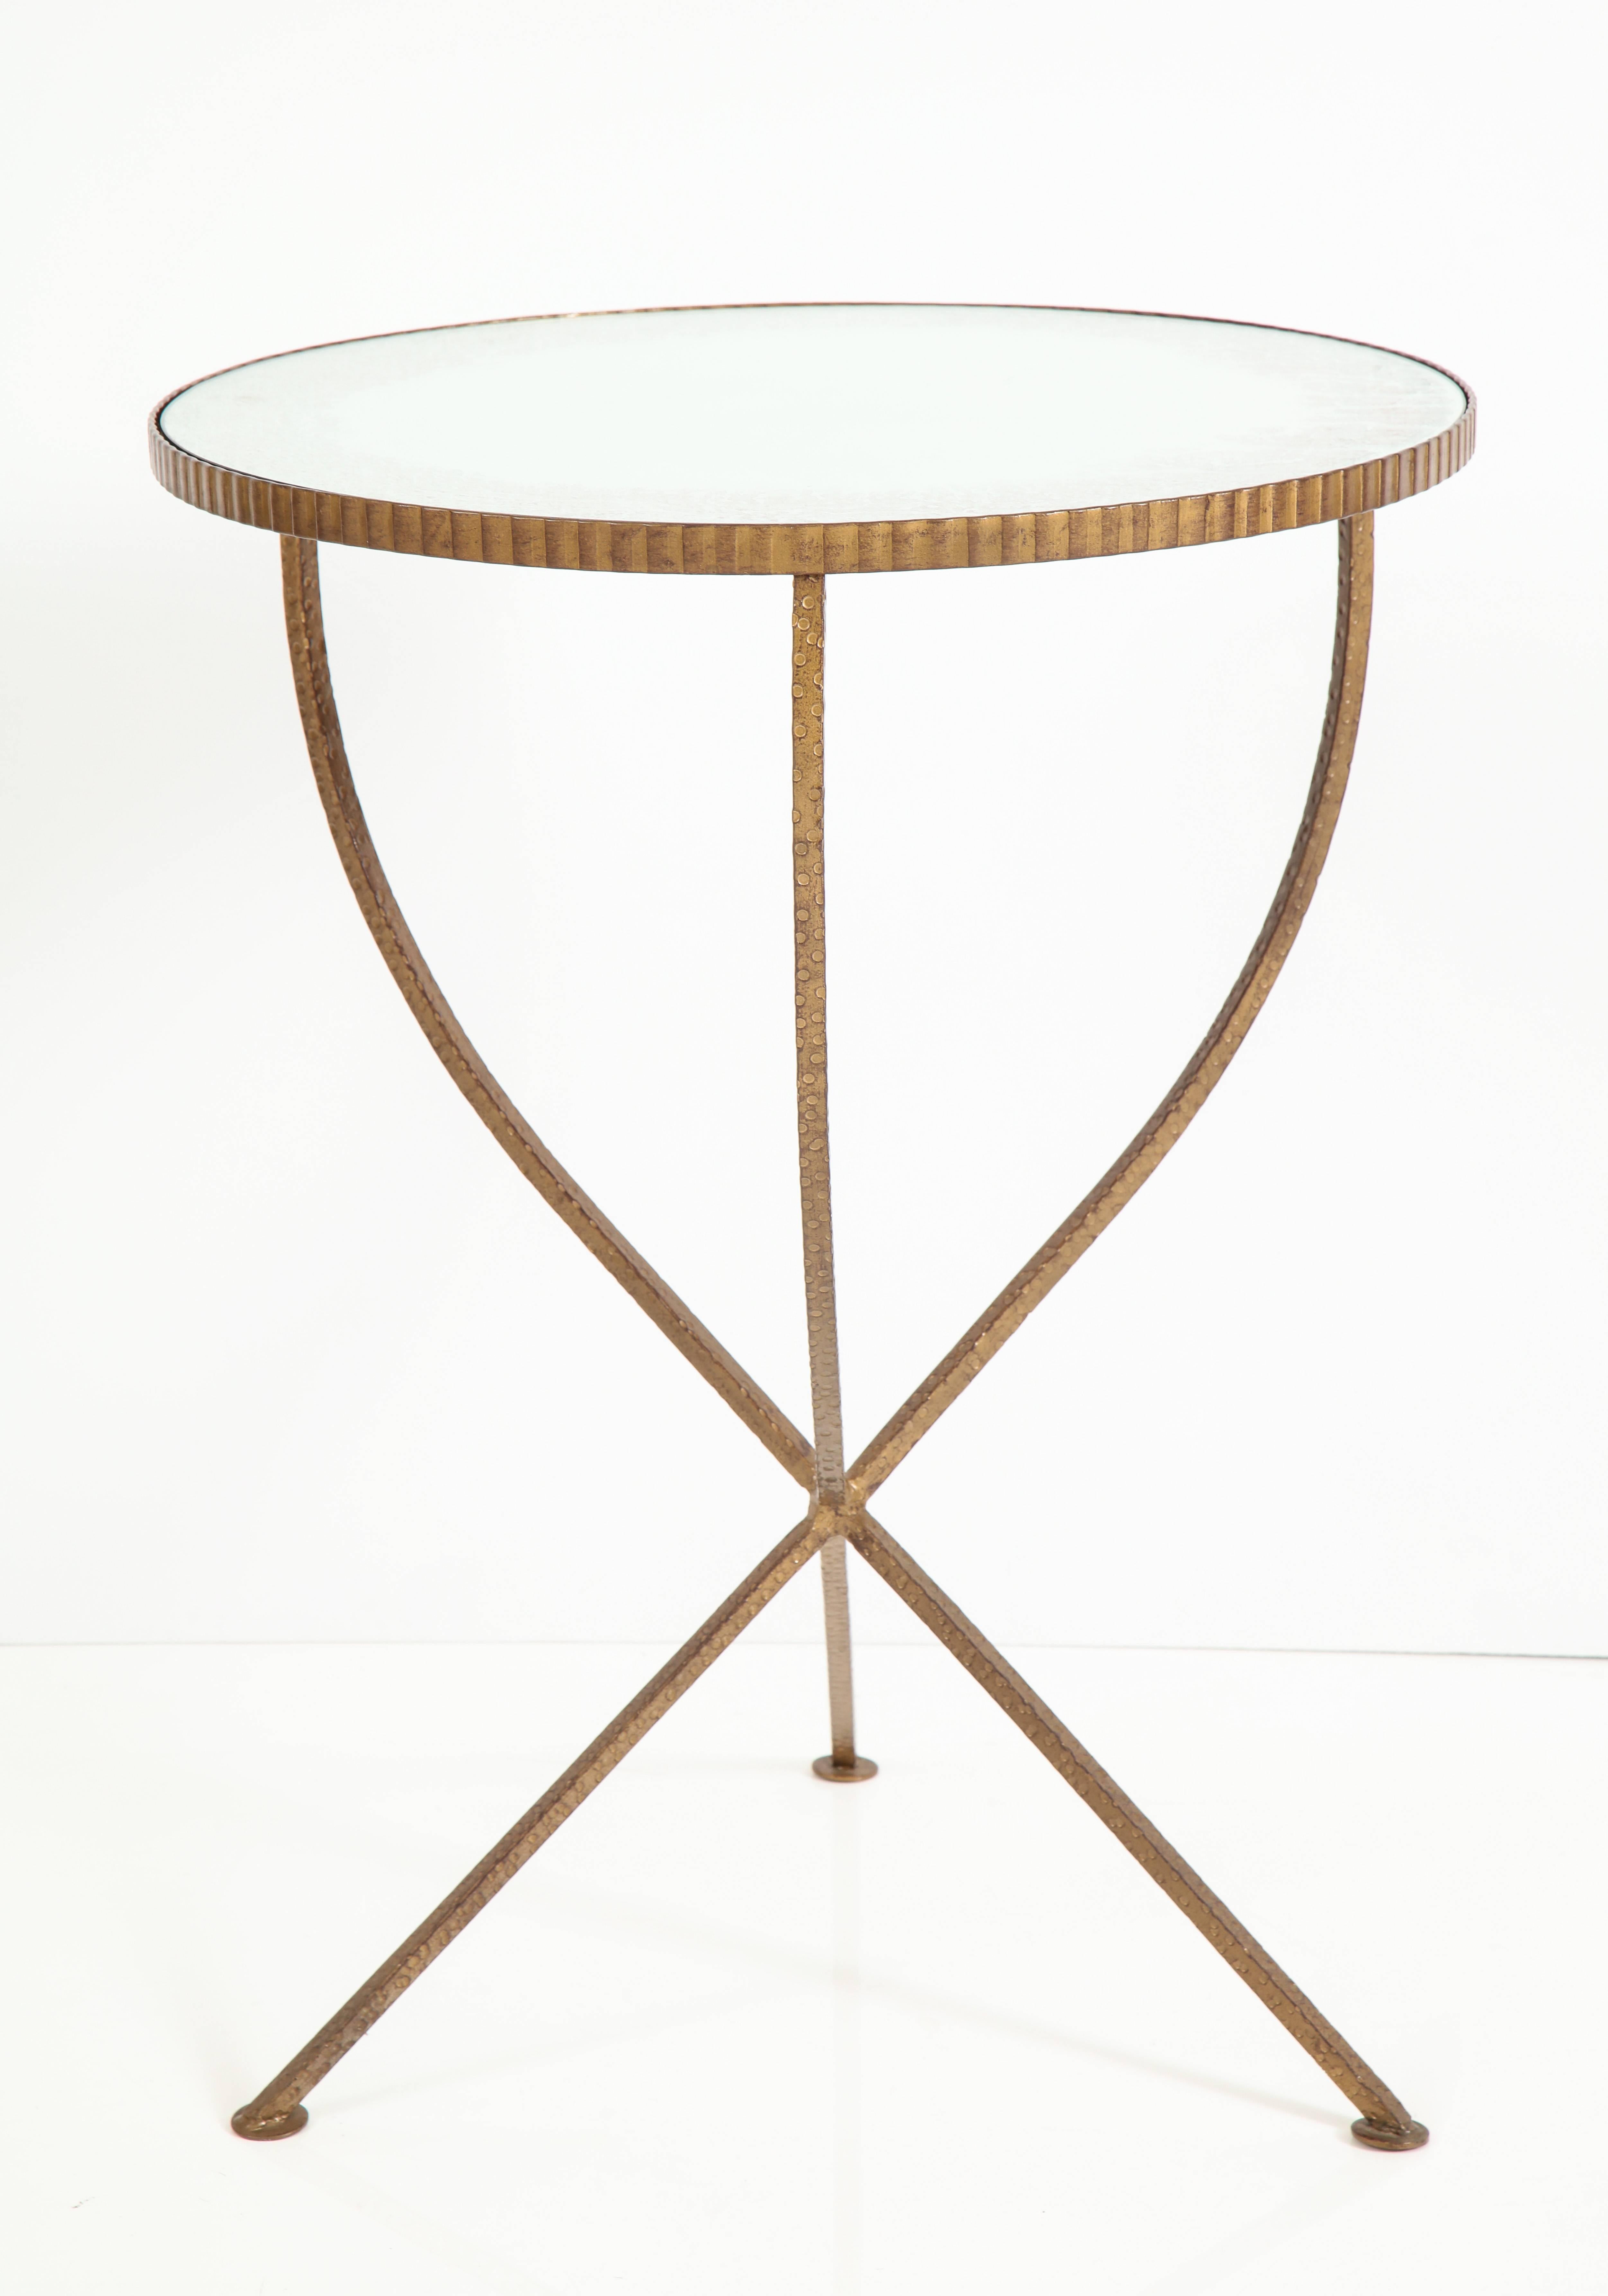 An Italian Art Deco hammered bronze gueridon with tripod base and mirrored glass circular top, the top with ribbed apron; the glass antique with hints of red along the edges.
Italy, circa 1940
Size: 27 3/4" high x 21"